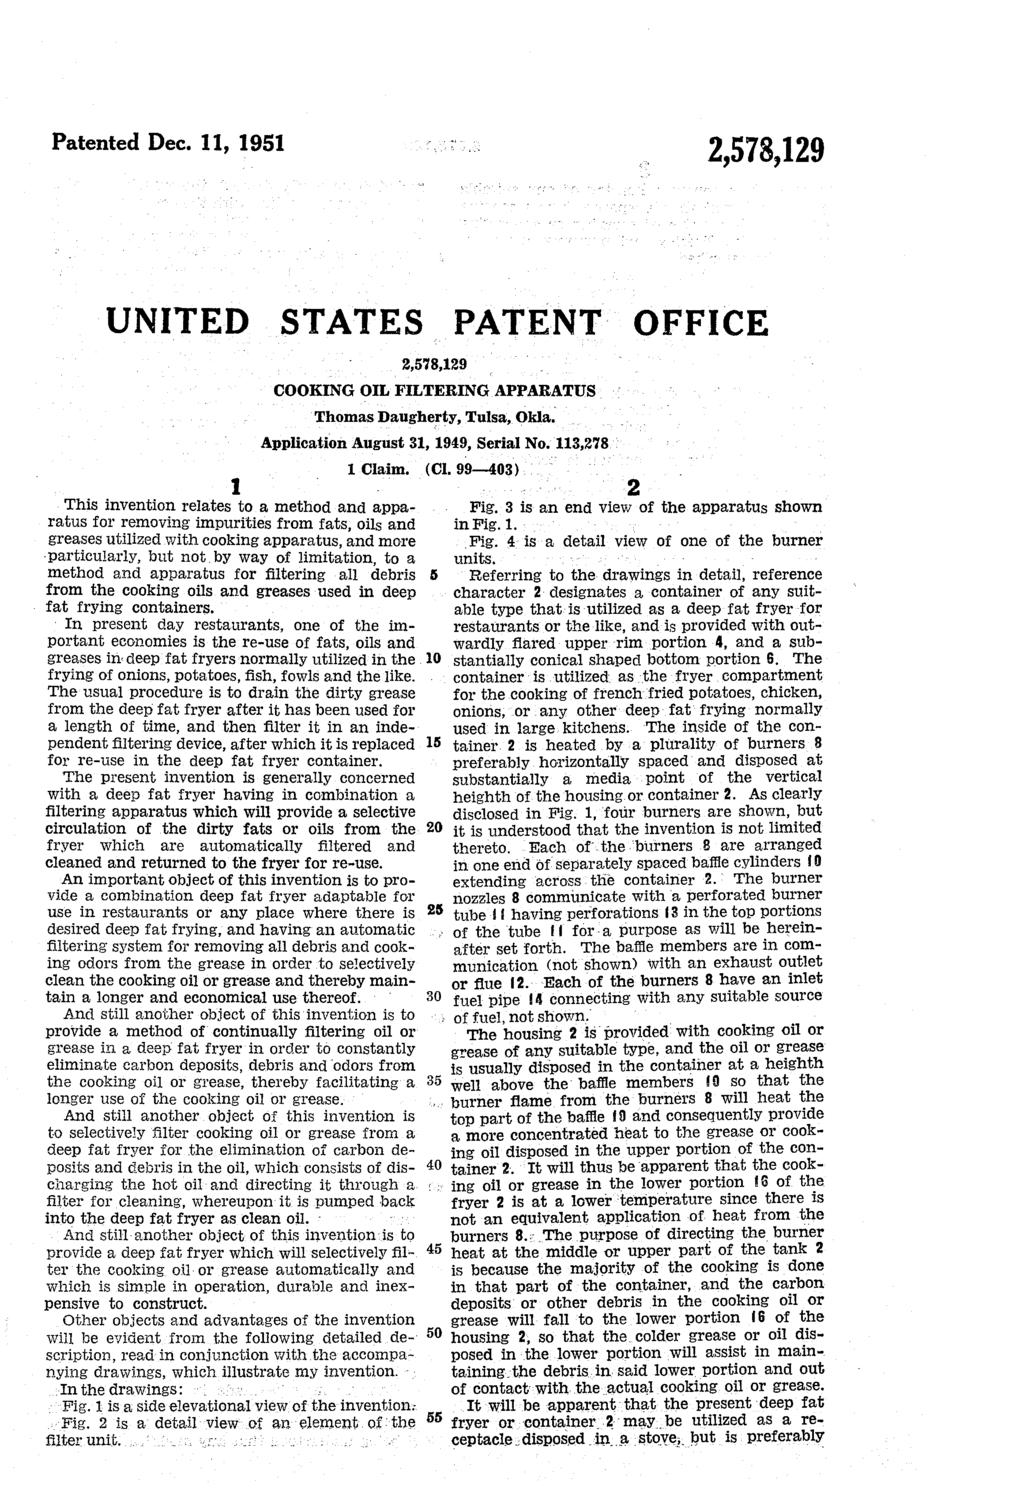 m Patented Dec. 11, 1951 2,578,129 UNITED STATES PATENT OFFICE Thomas Daugherty, Tulsa, Okla..... Application August 31, 1949, Serial No. 113,278. 1. Claim. (CL.